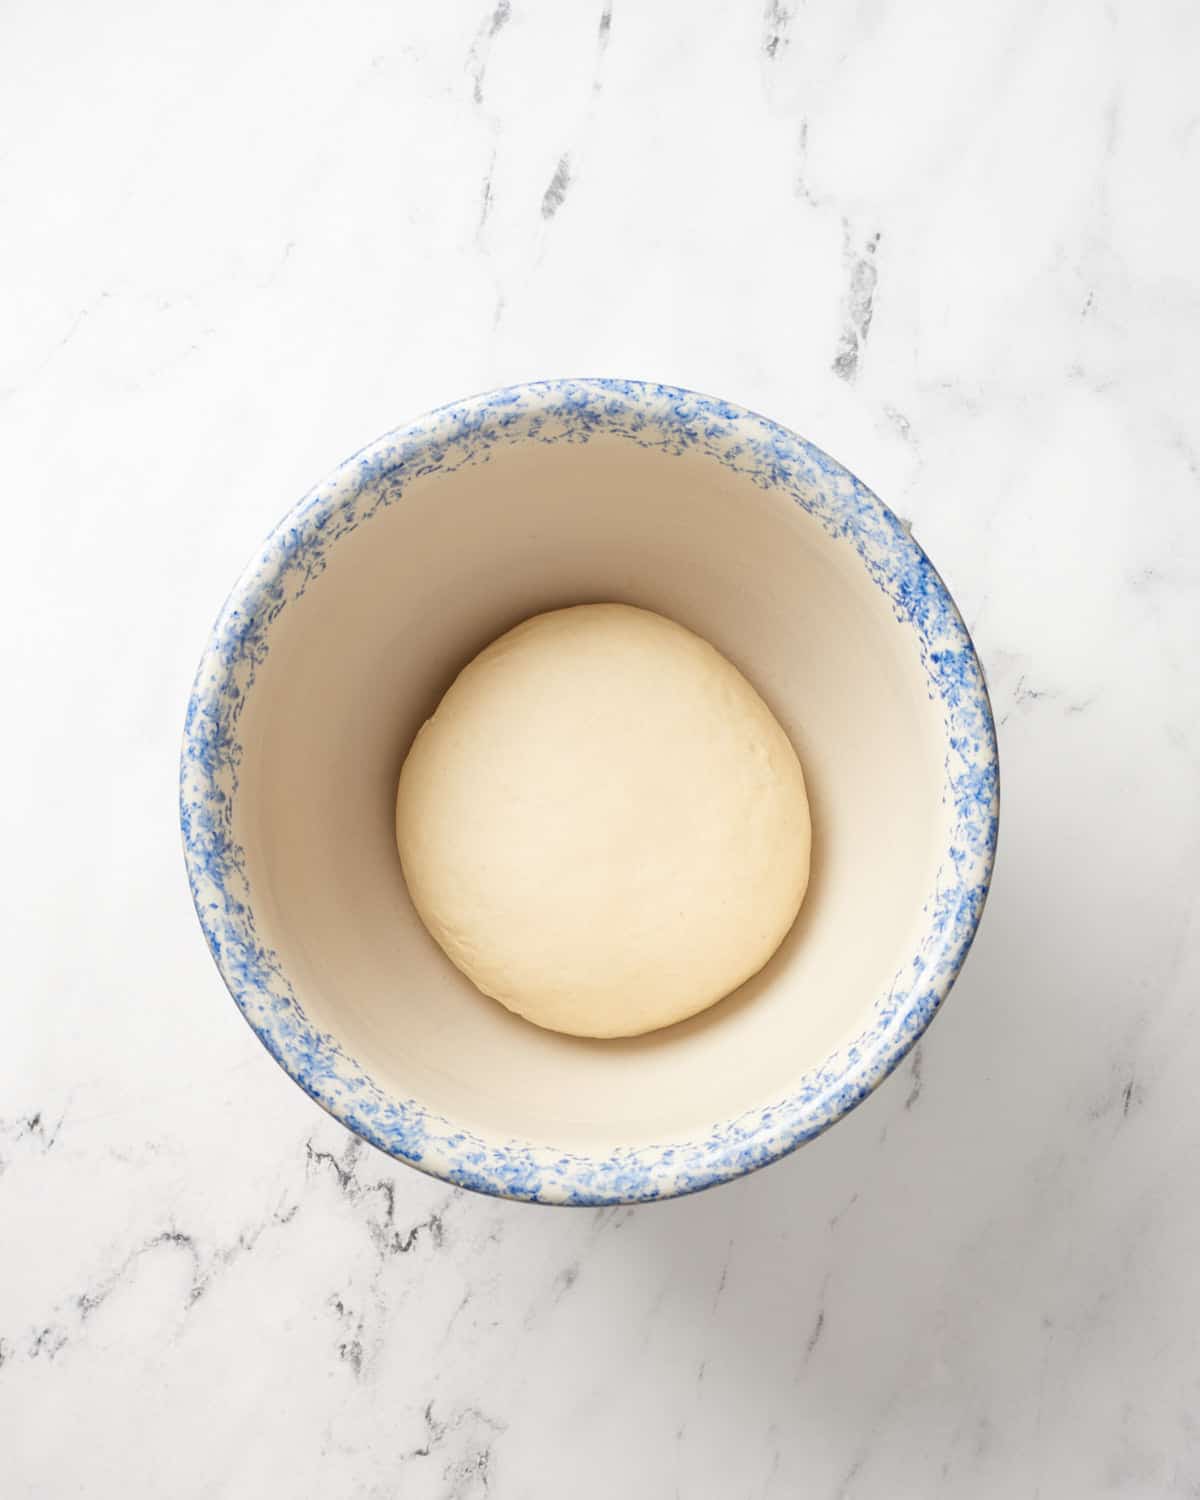 Pretzel dough ball in large bowl on marble background